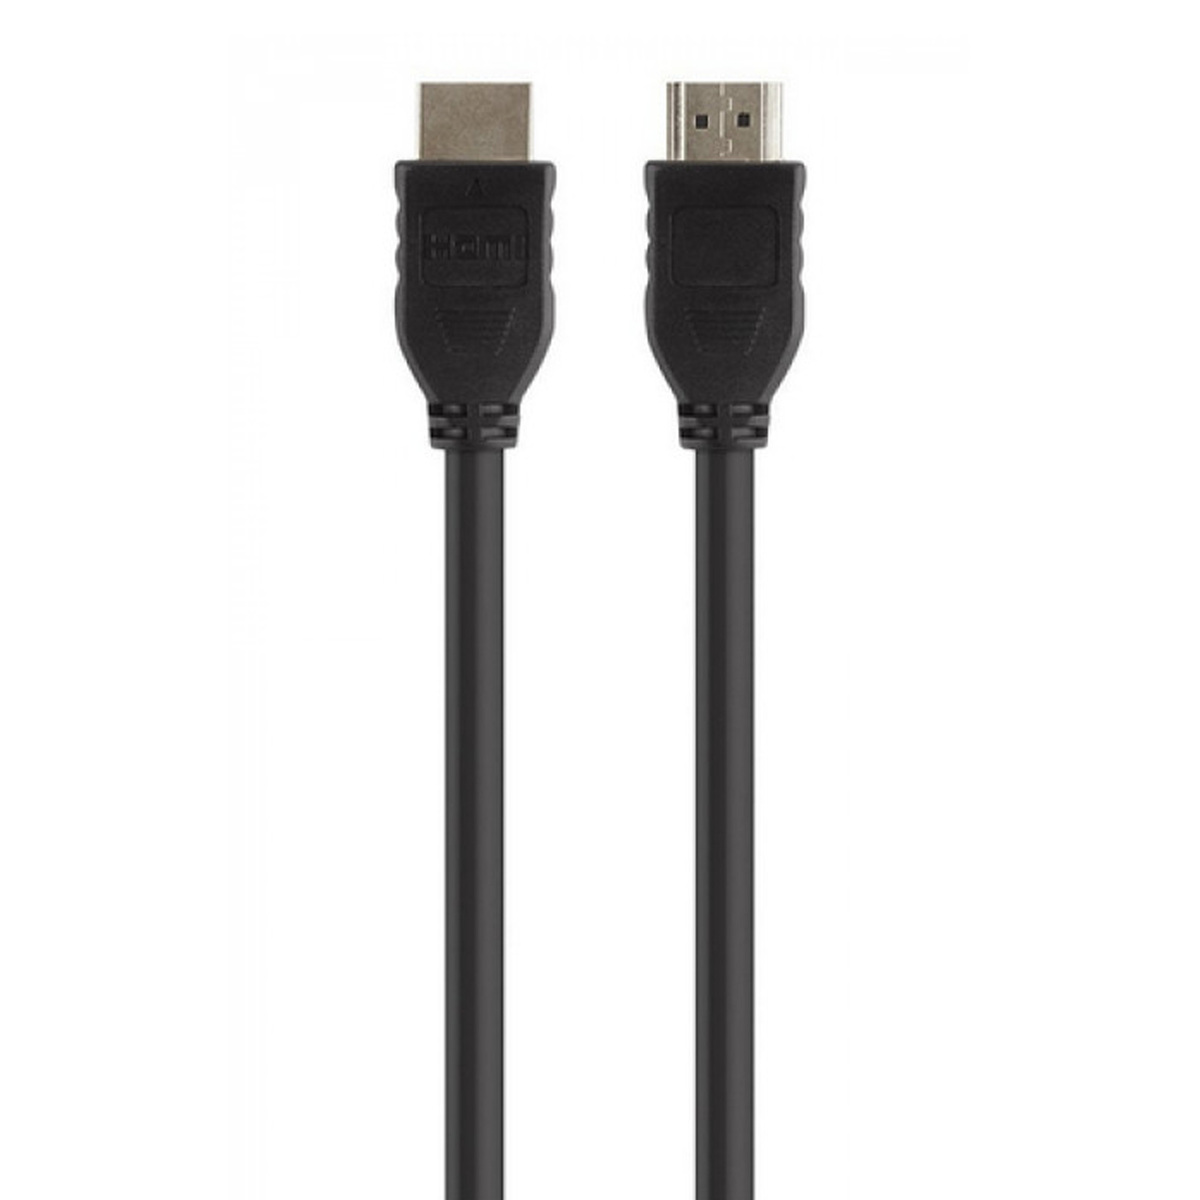 Belkin High-Speed HDMI Cable, 5 m, F3Y017bt